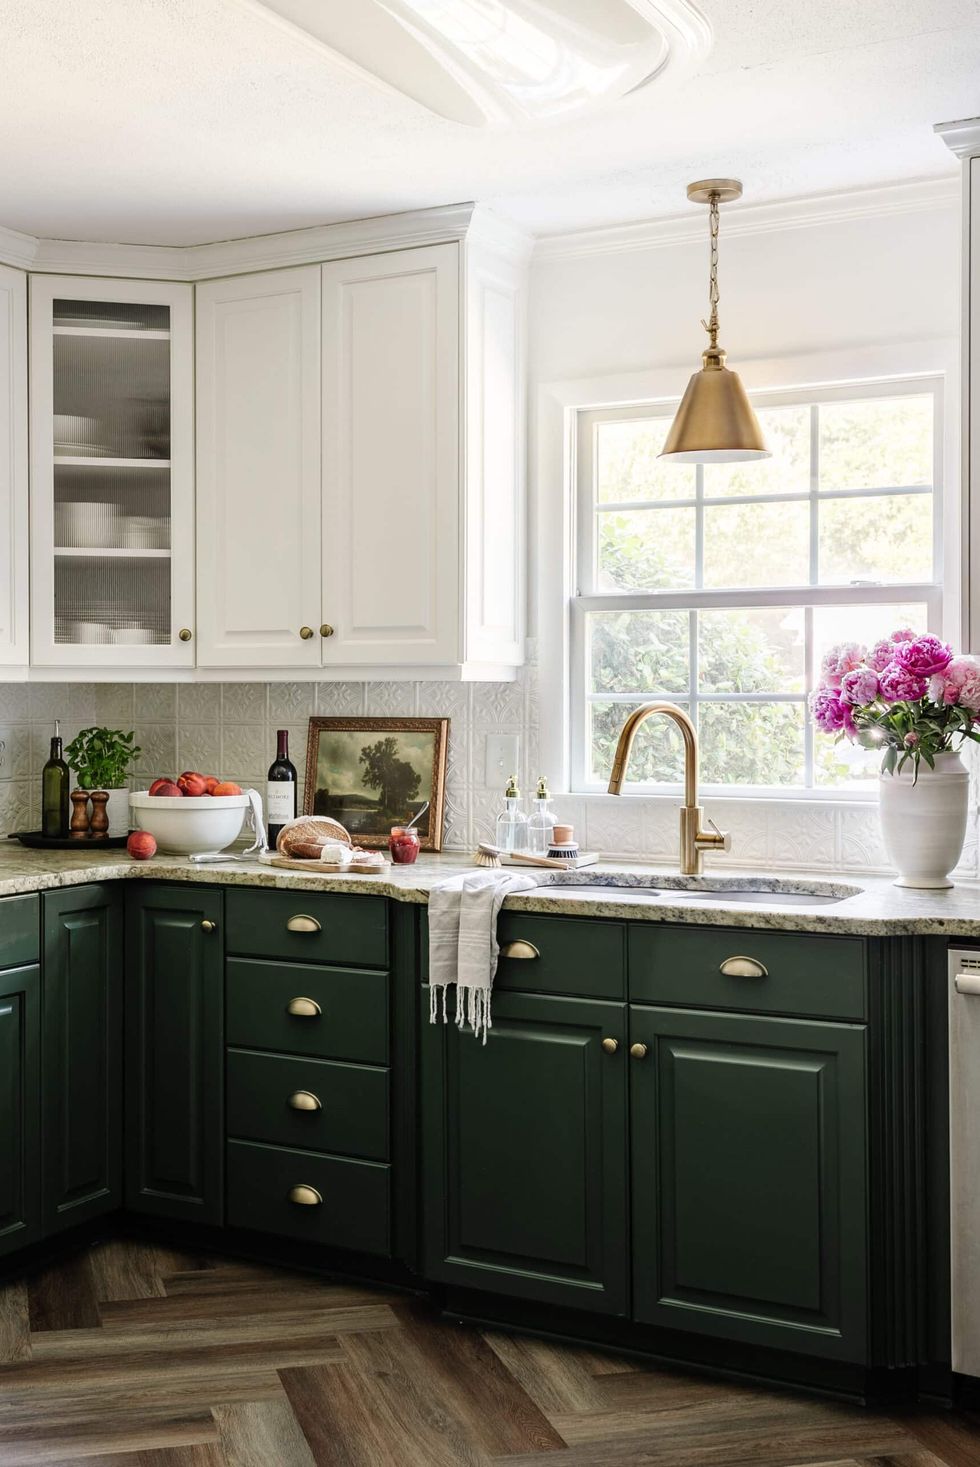 Kitchen Decor: Affordable Kitchen Styling Essentials for the Home